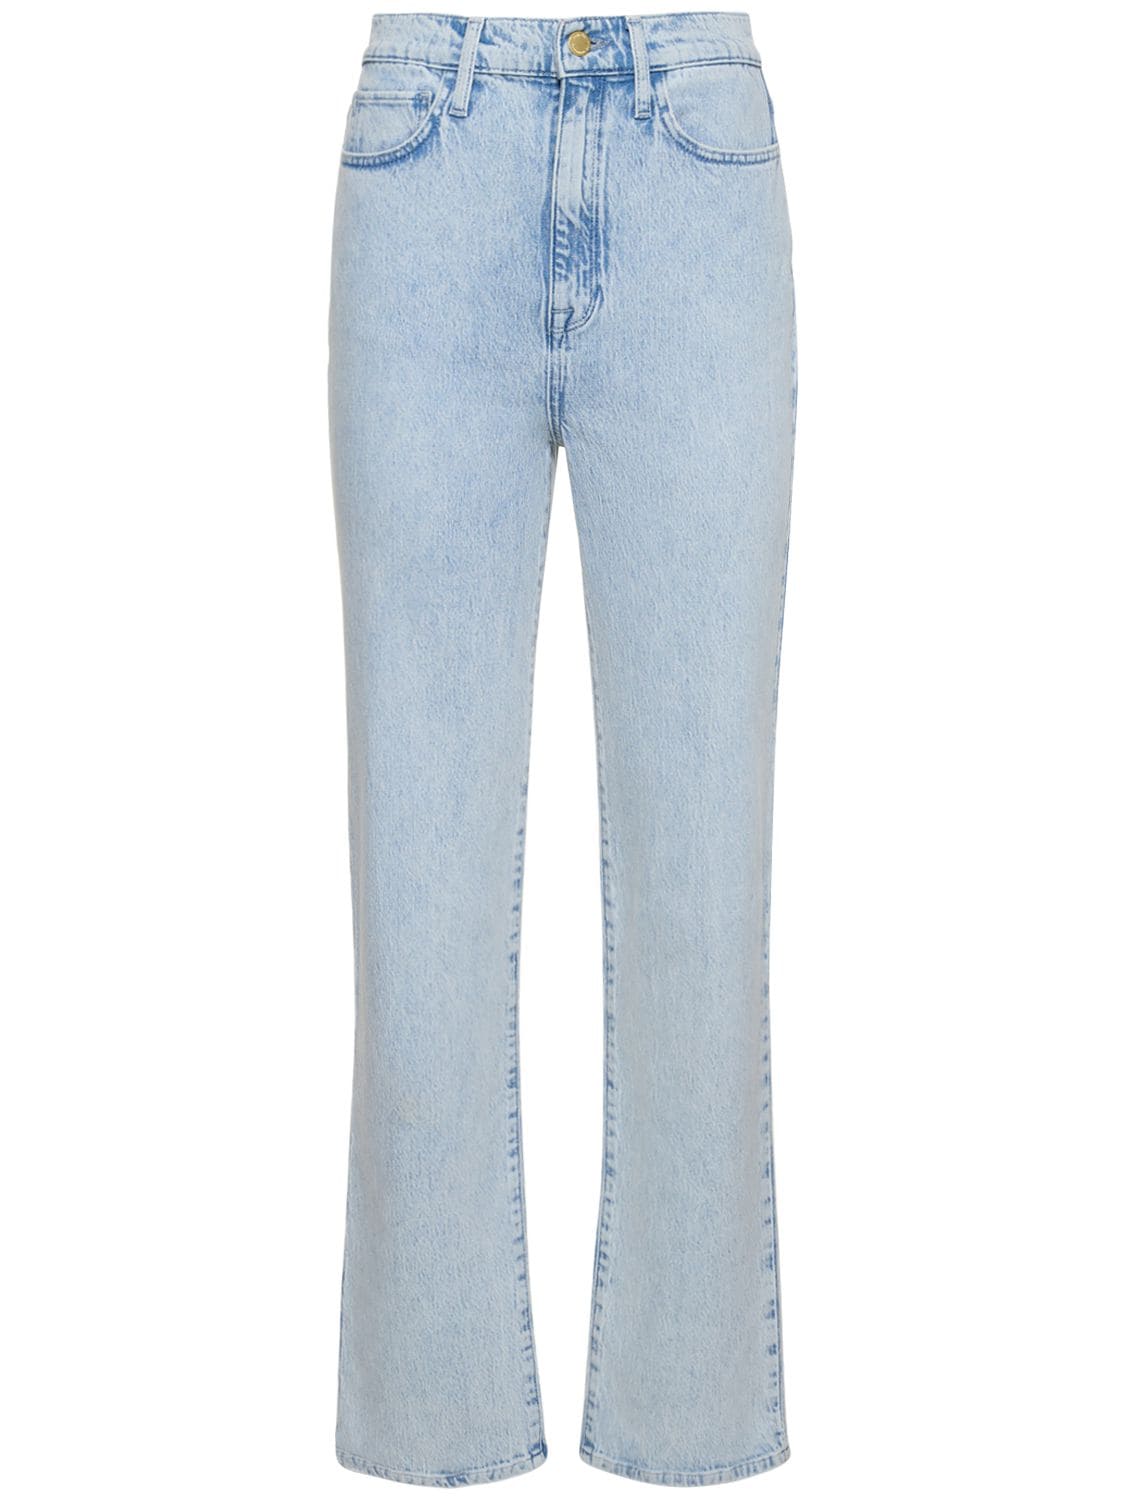 Triarchy Ms.  High Rise Denim Jeans In Summer Light Indi